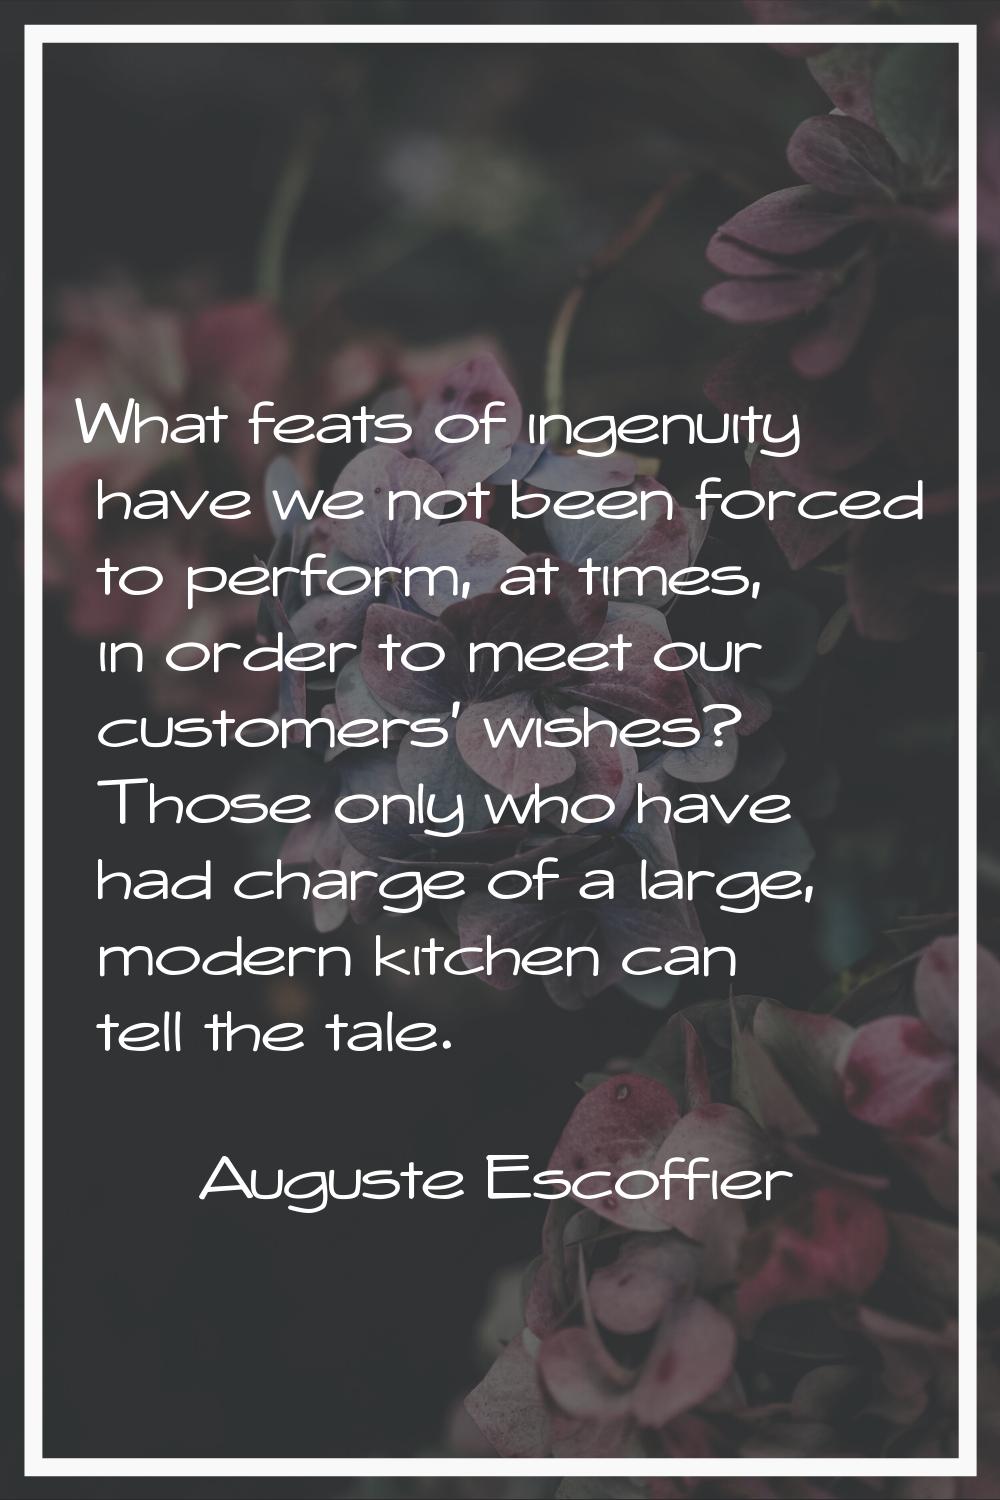 What feats of ingenuity have we not been forced to perform, at times, in order to meet our customer